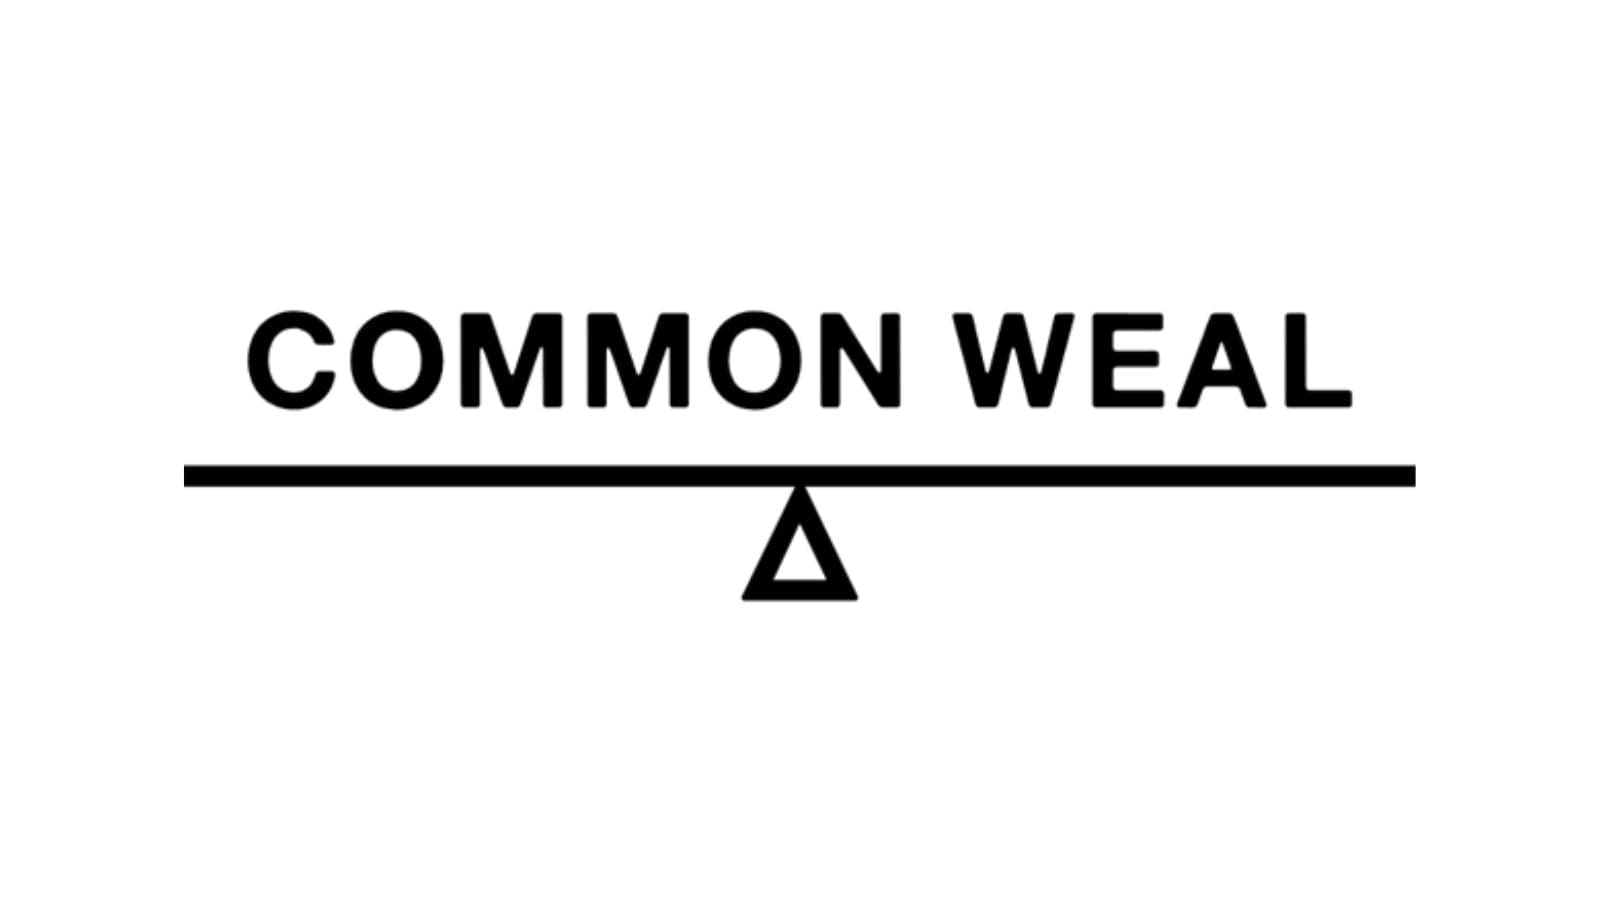 The words "COMMON WEAL" on top of a line connected to a triangle in the middle.